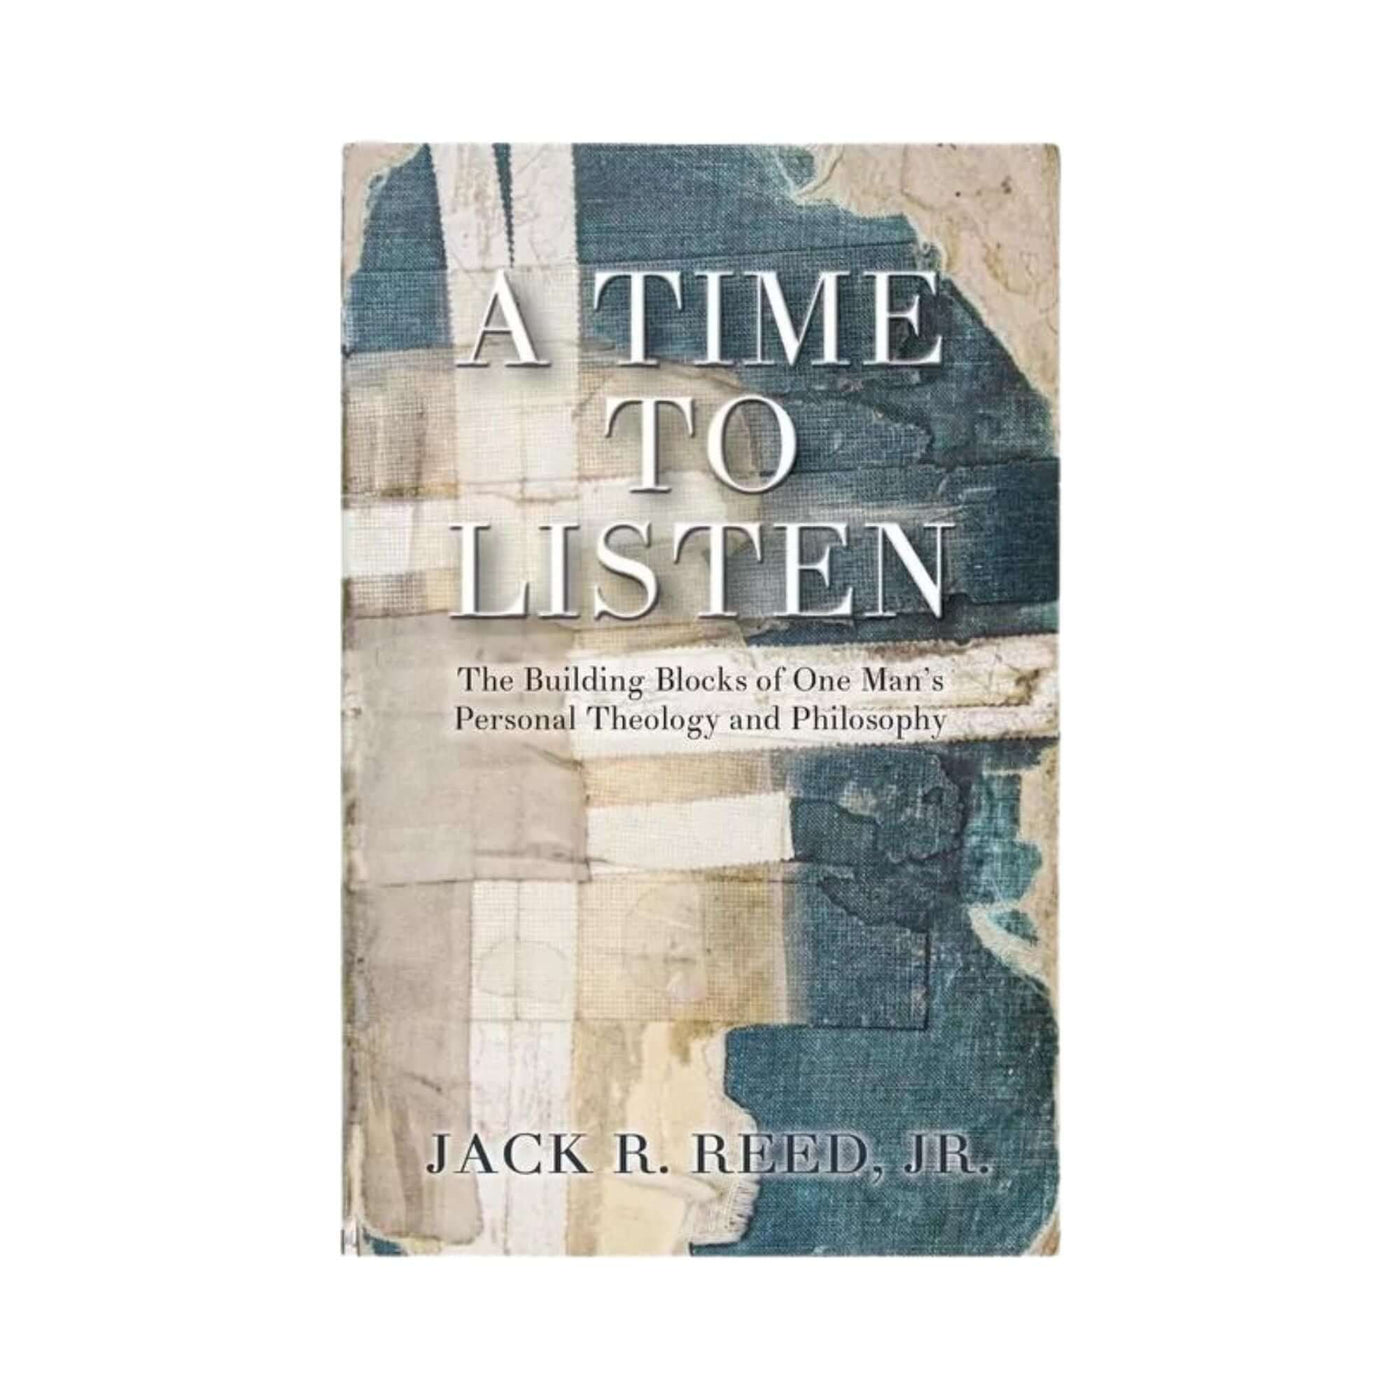 A Time To Listen by Jack Reed, Jr. (Hardcover)